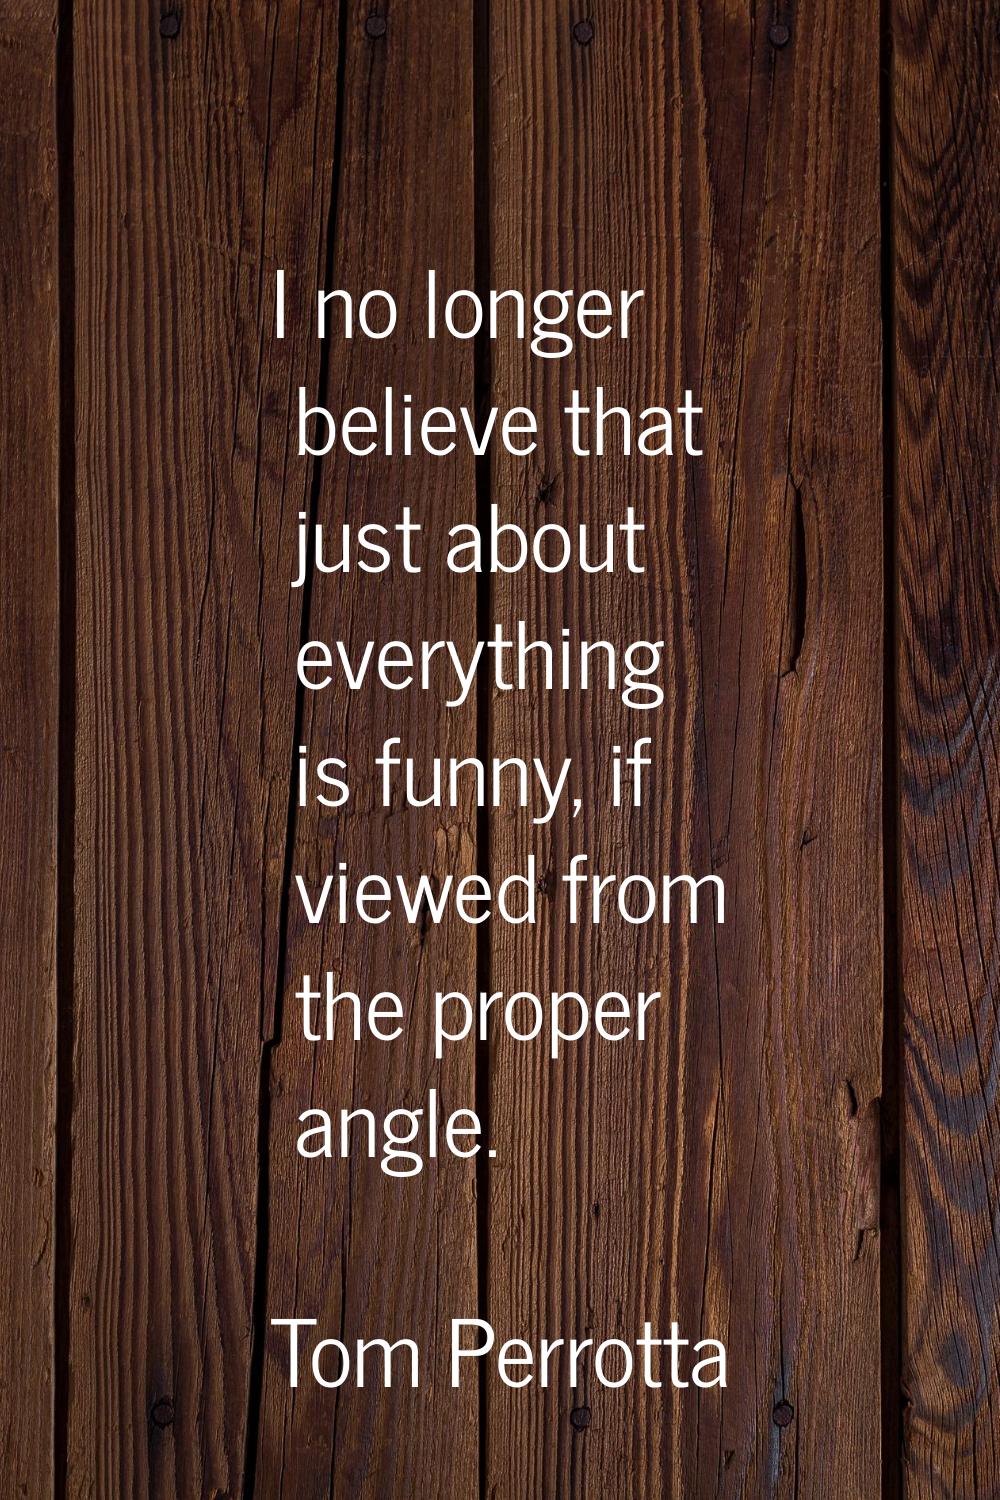 I no longer believe that just about everything is funny, if viewed from the proper angle.